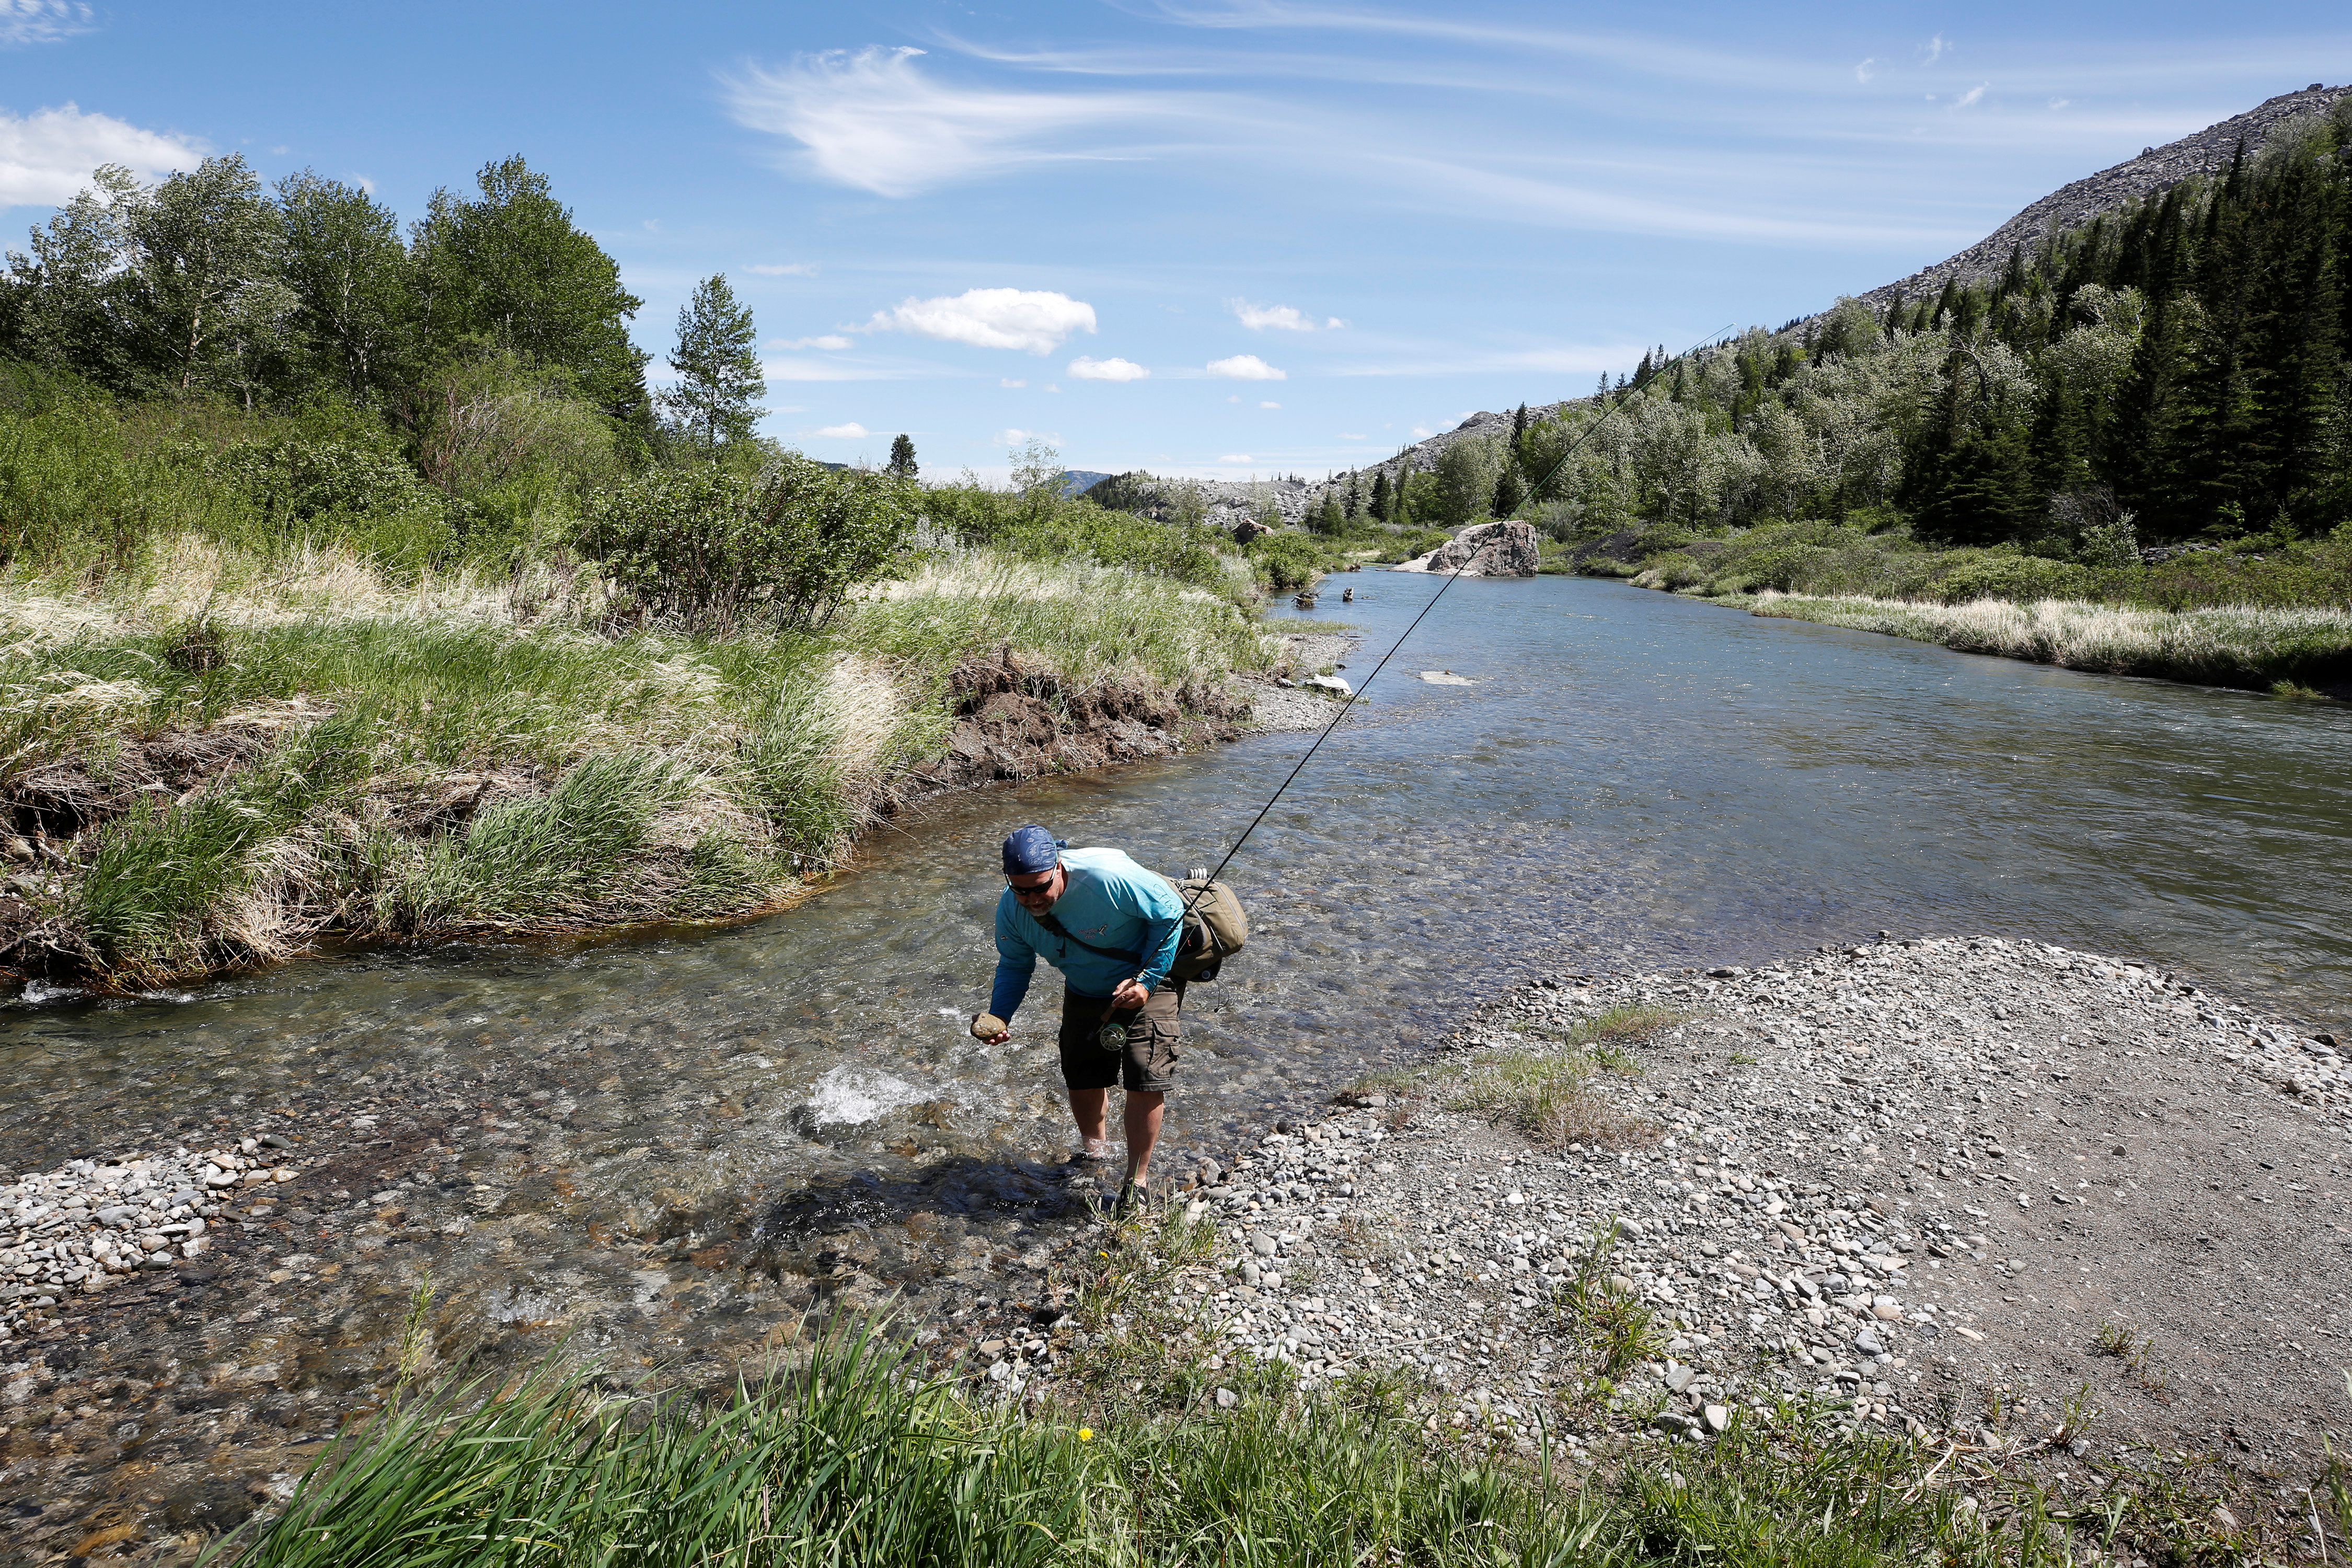 Fly fisherman Olson fishes the Crowsnest River near Blairmore